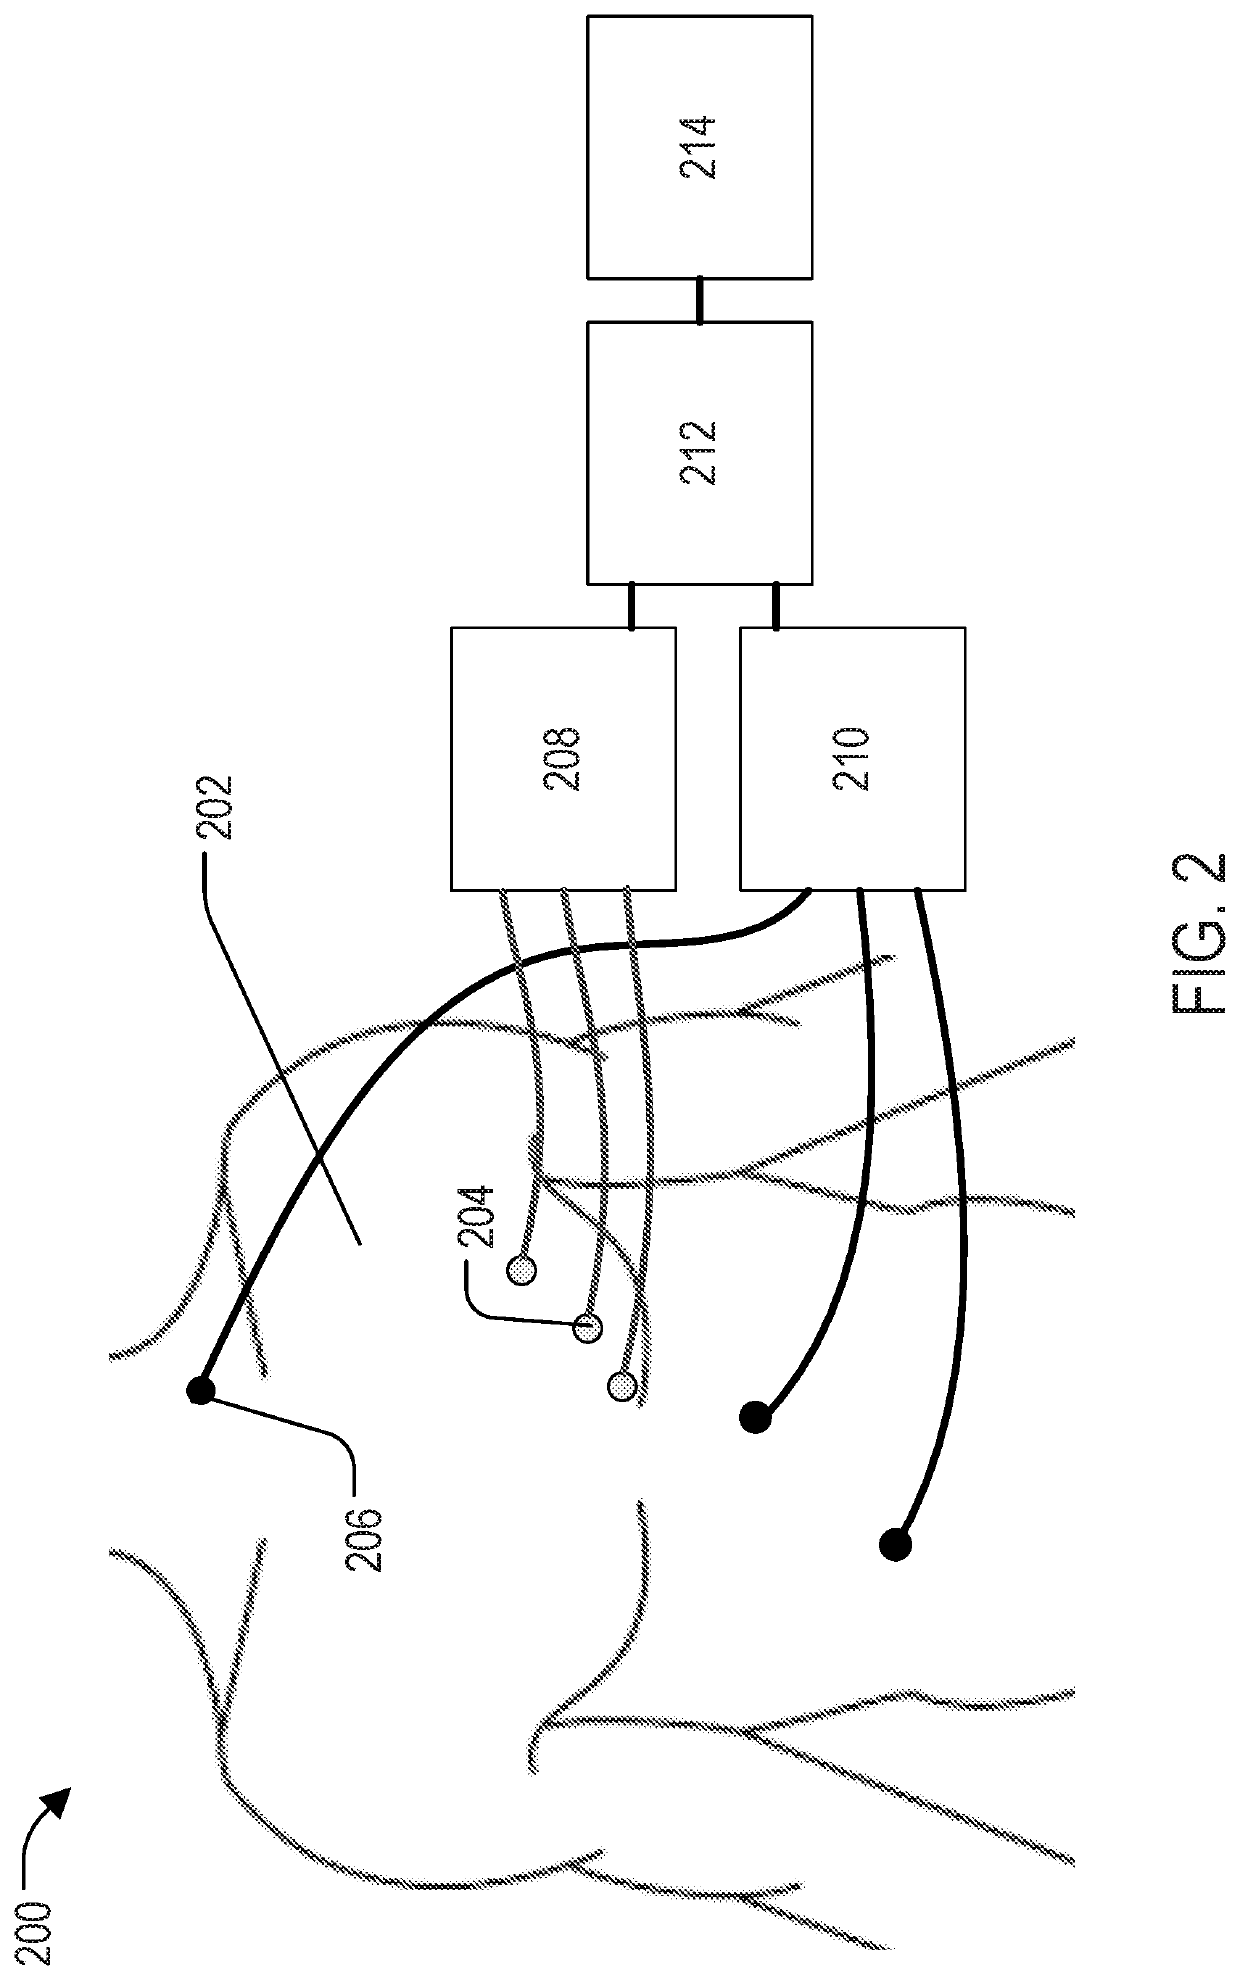 Systems and Methods for Controlling Imaging Artifacts Using an Array of Sensor Data